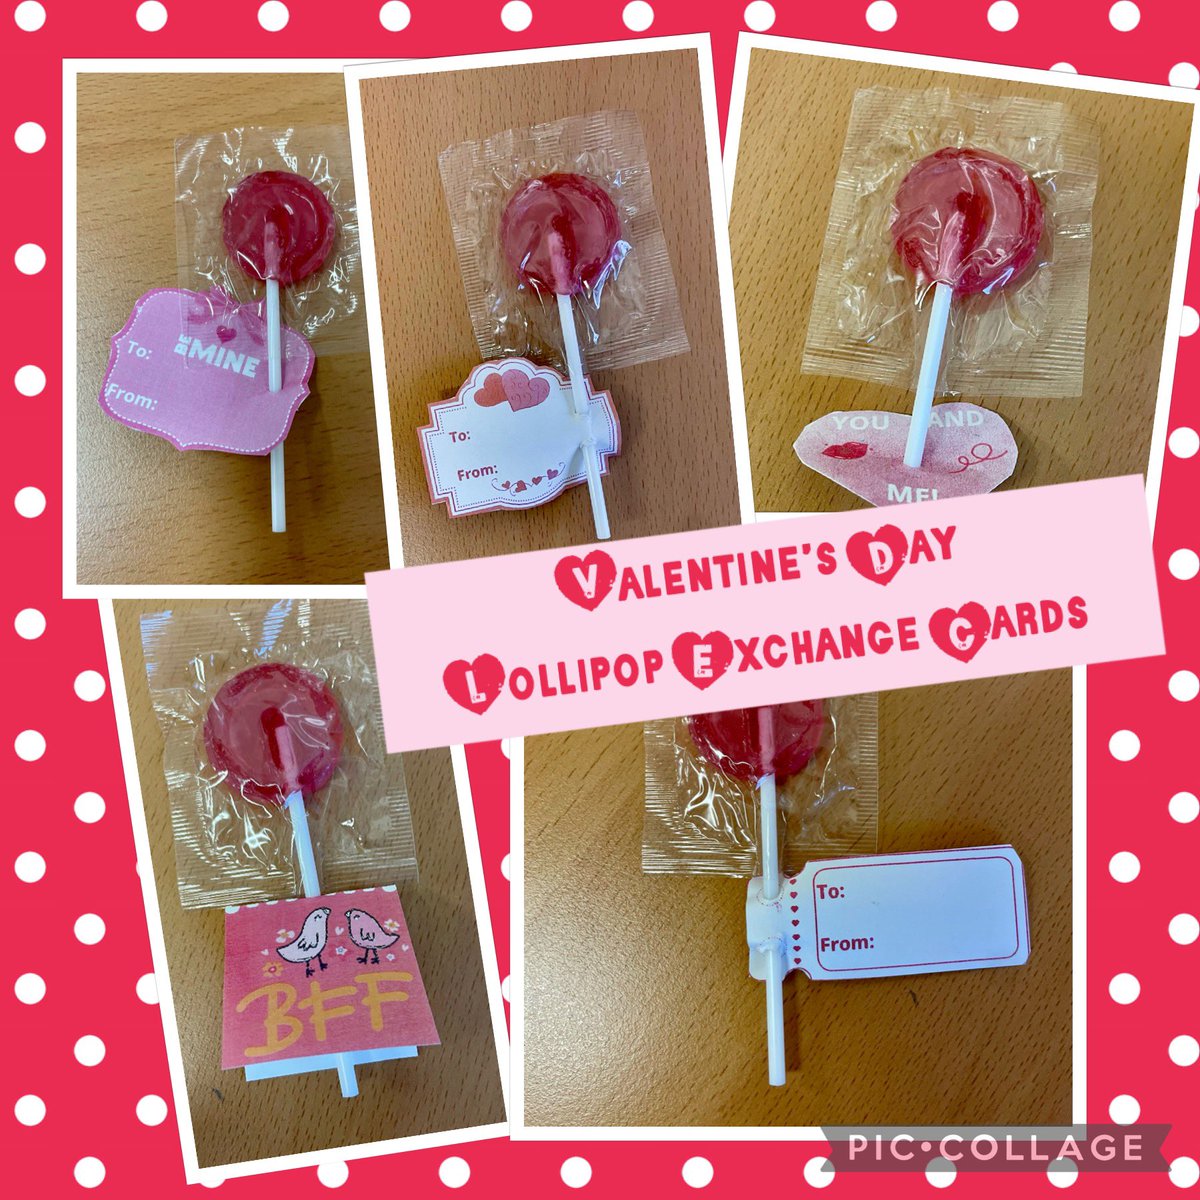 ❤️Valentine's Day Freebie❤️

Choose from 5 different styles to give to your Ss 🍭

Download from🔗linktr.ee/MsNiamhBrady

#EdSharelE @FFBteachers
@TeachersPLN 
#ValentinesDay
#ValentinesDay2023 #valentinesdaygift